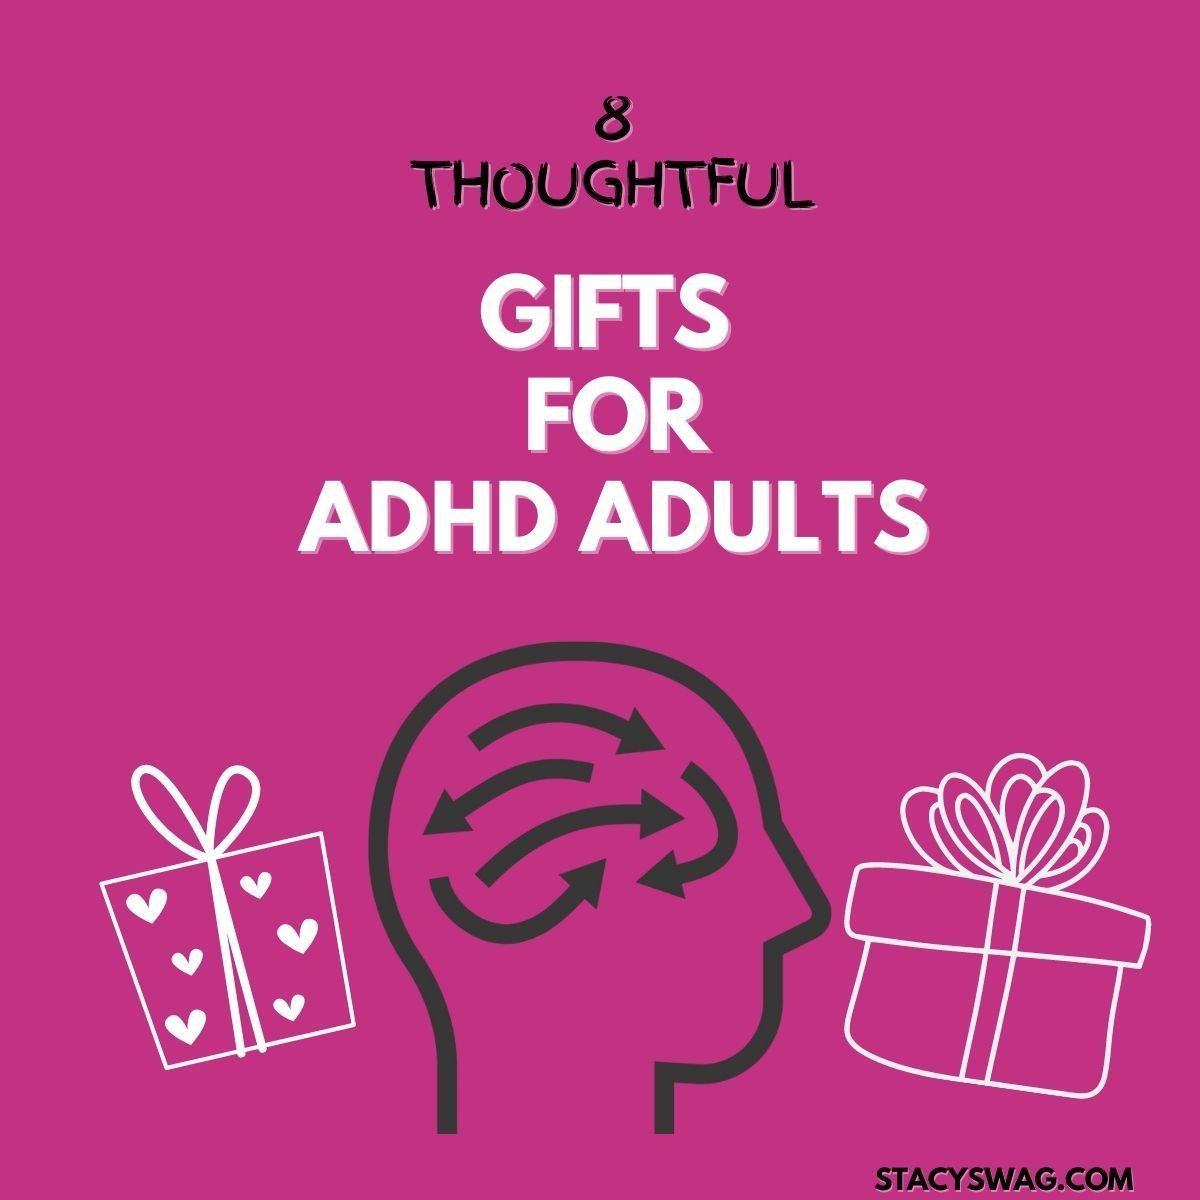 8 Thoughtful Gifts For ADHD Adults